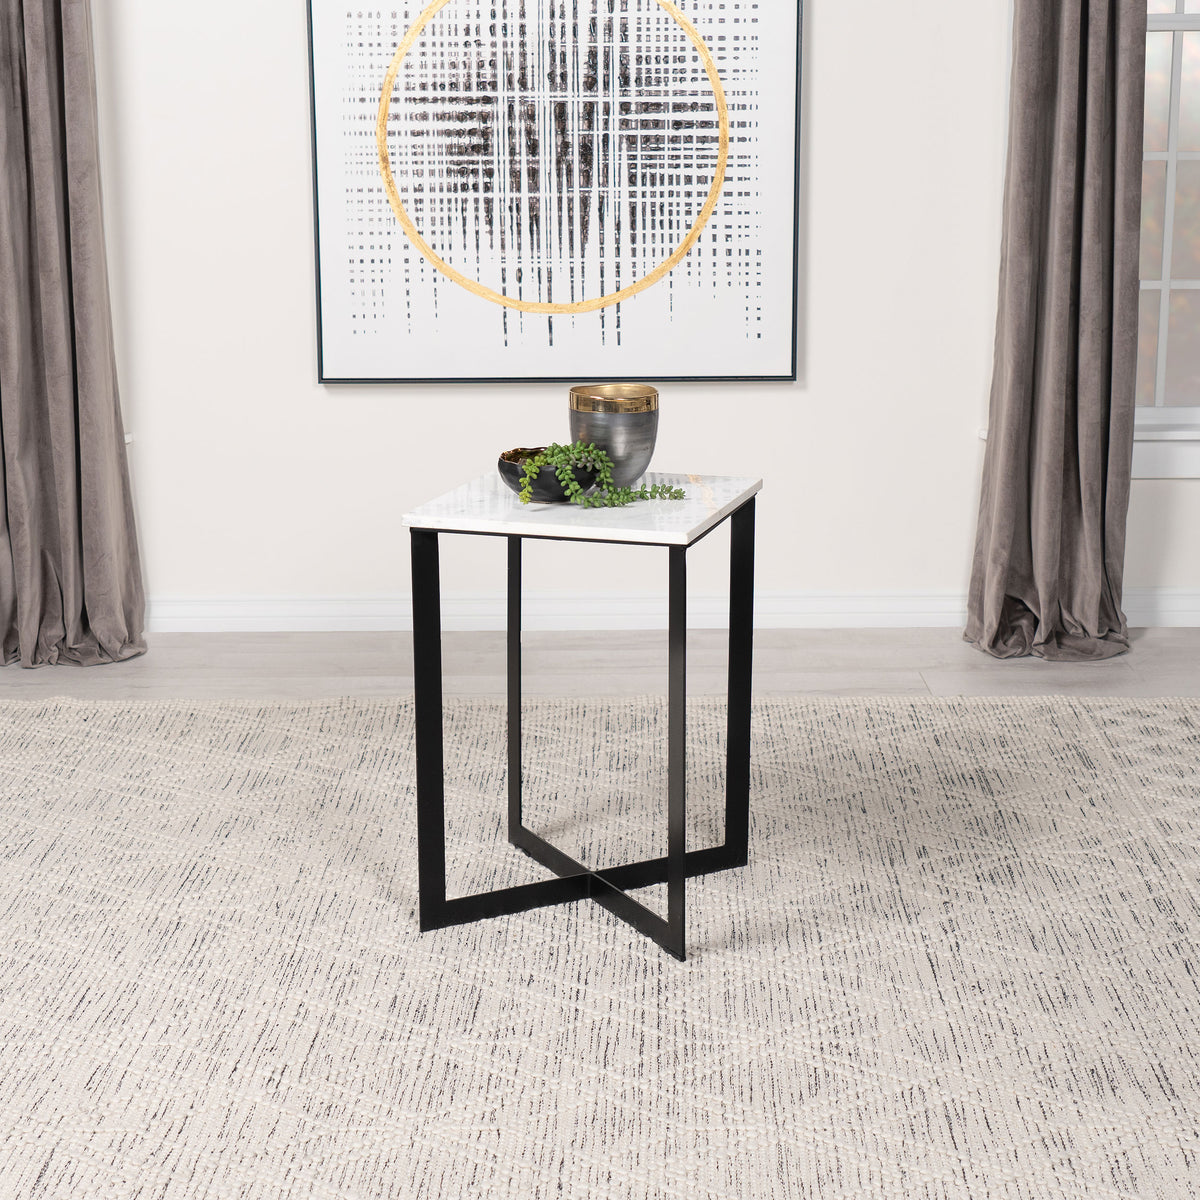 Tobin Square Marble Top End Table White and Black Tobin Square Marble Top End Table White and Black Half Price Furniture